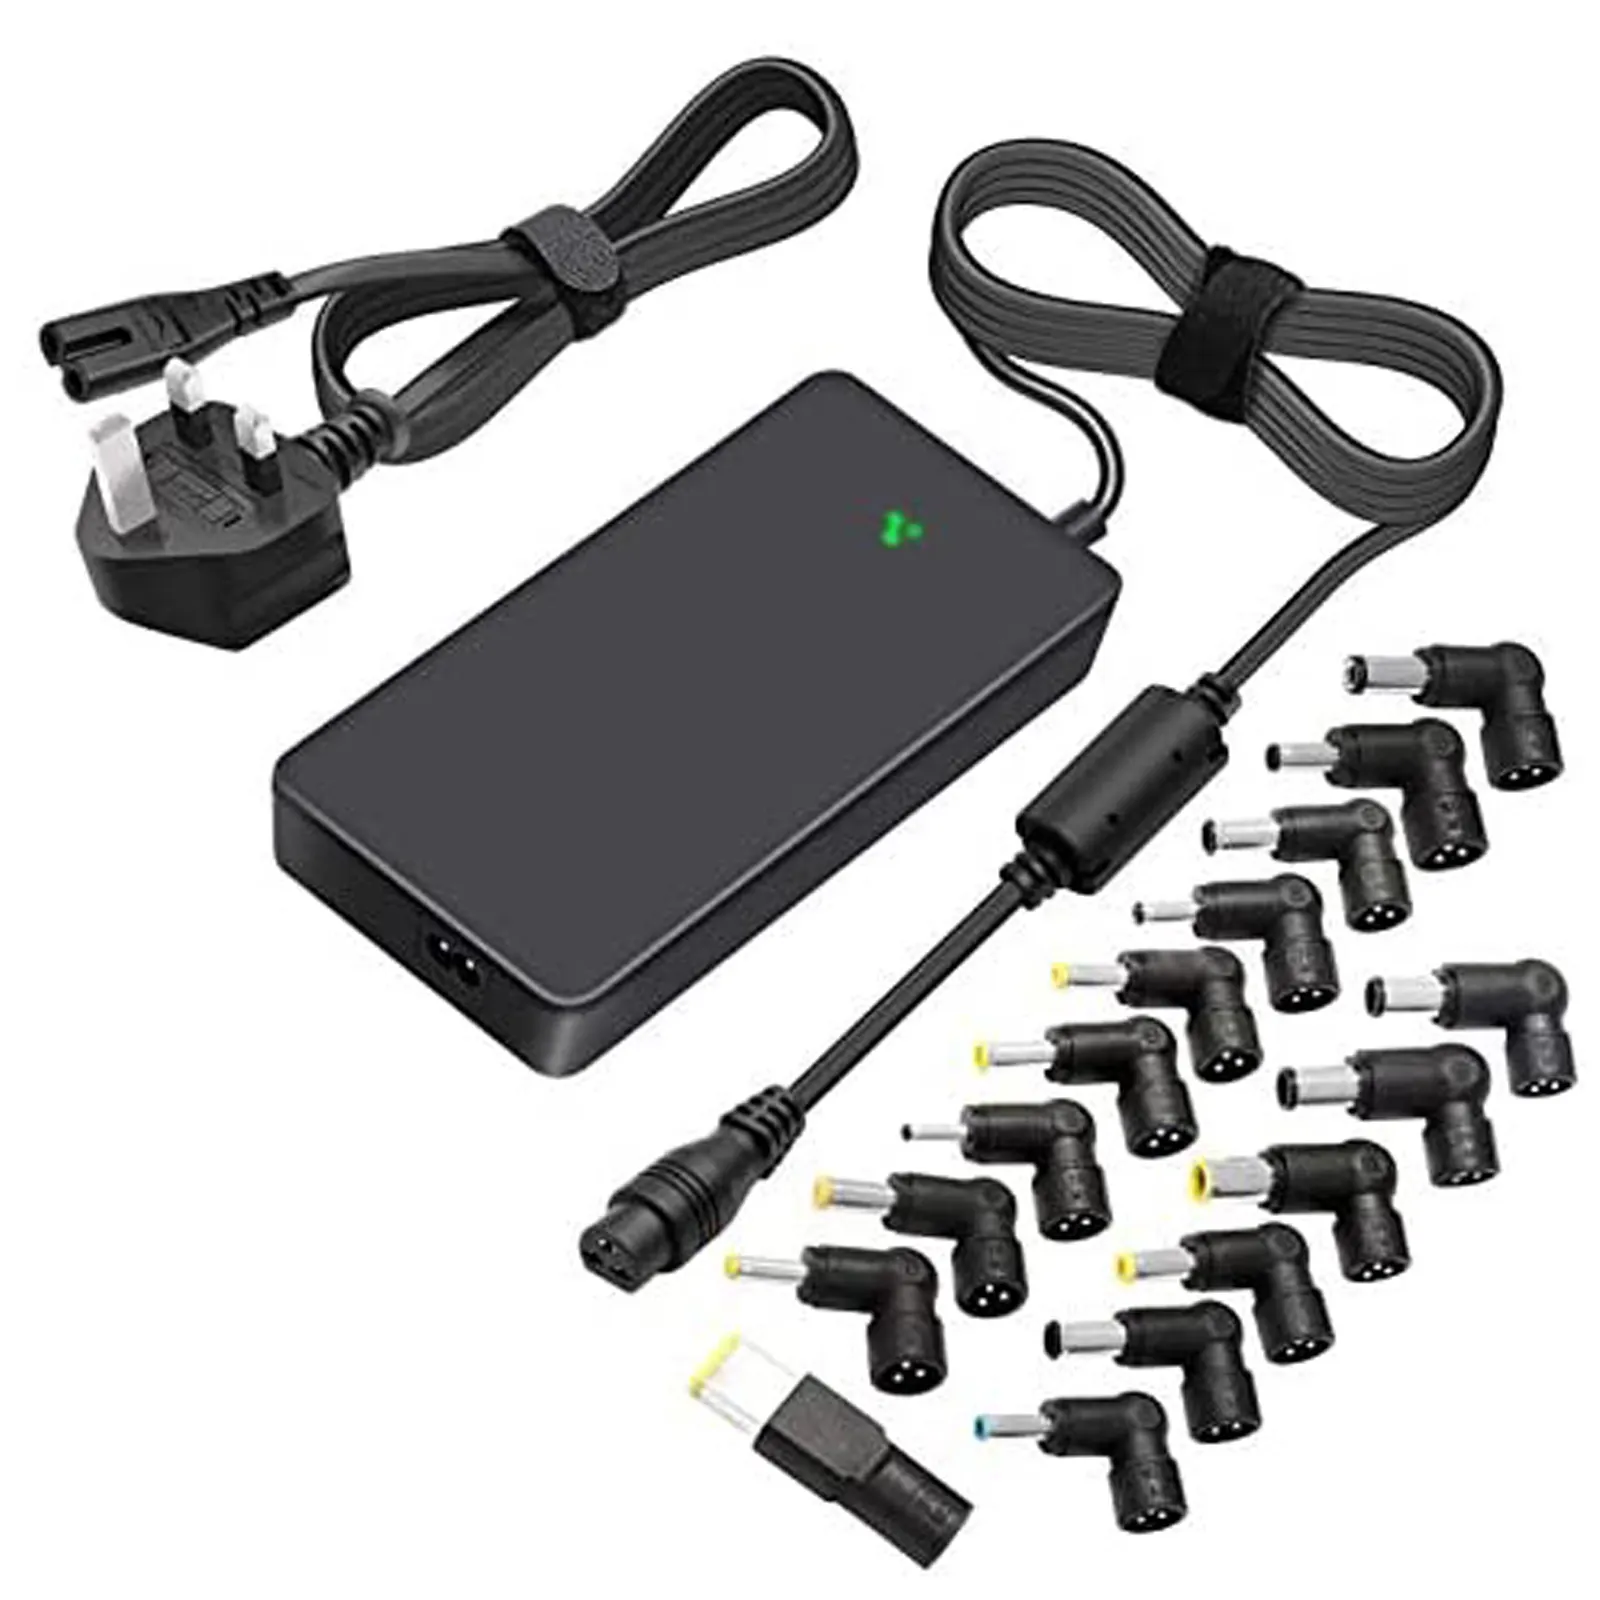 Hot Sell Amazon 90W USB Laptop Chargers Power Adapter for Dell Acer Asus Toshiba Lenovo IBM HP with 16 connectors